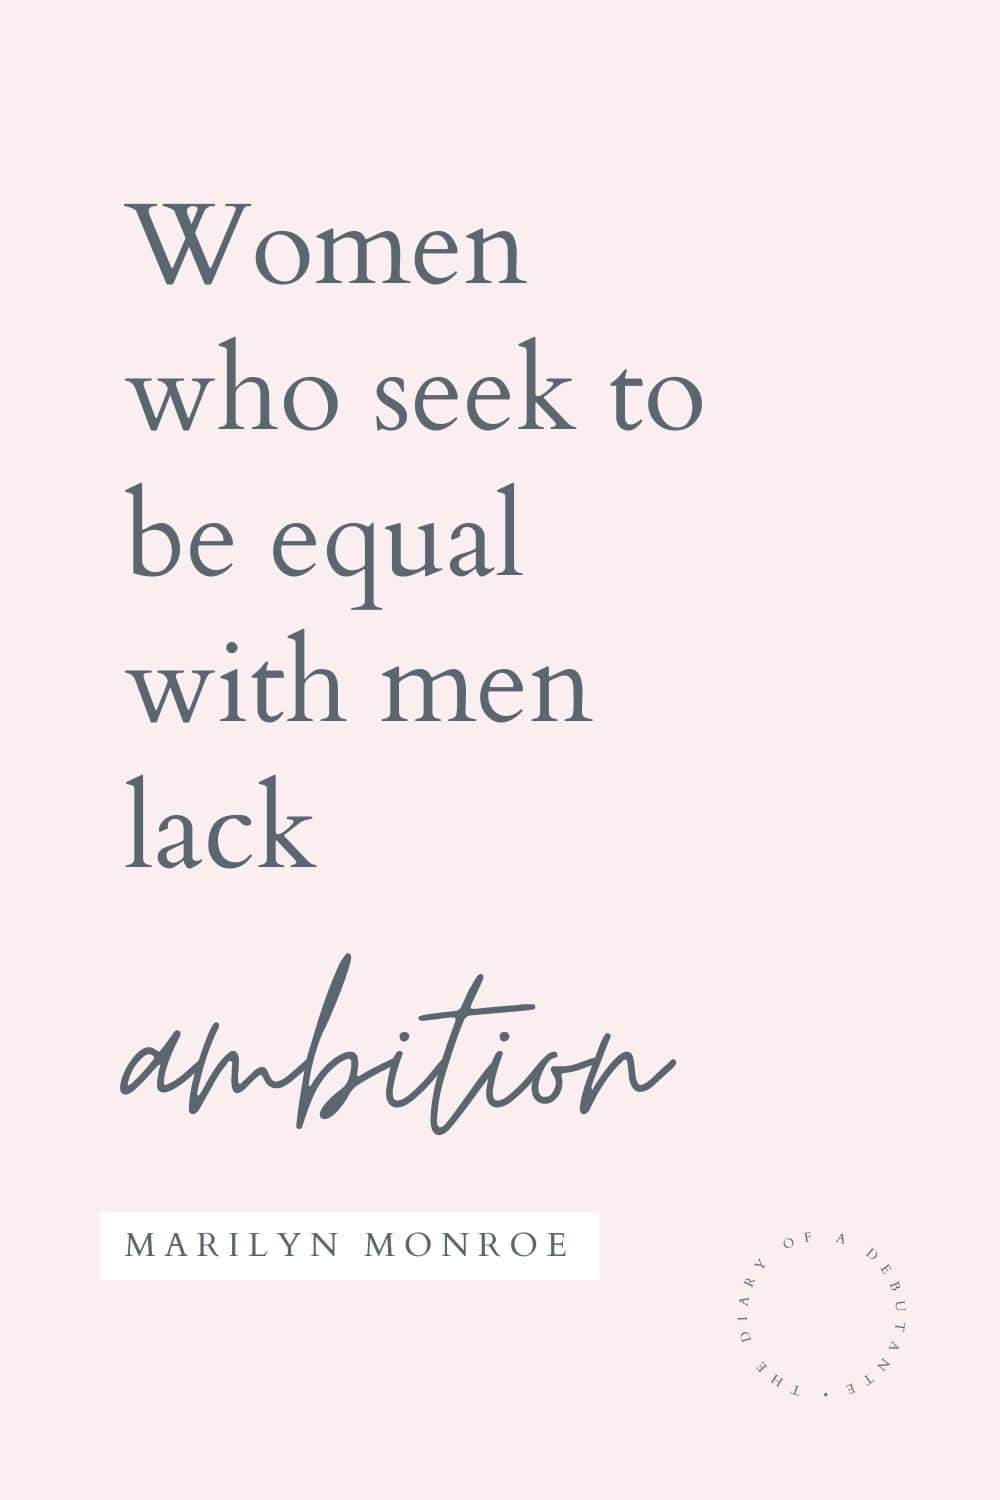 Marilyn Monroe quote curated as part of a collection of inspirational quotes for Friday for women by blogger Stephanie Ziajka on Diary of a Debutante